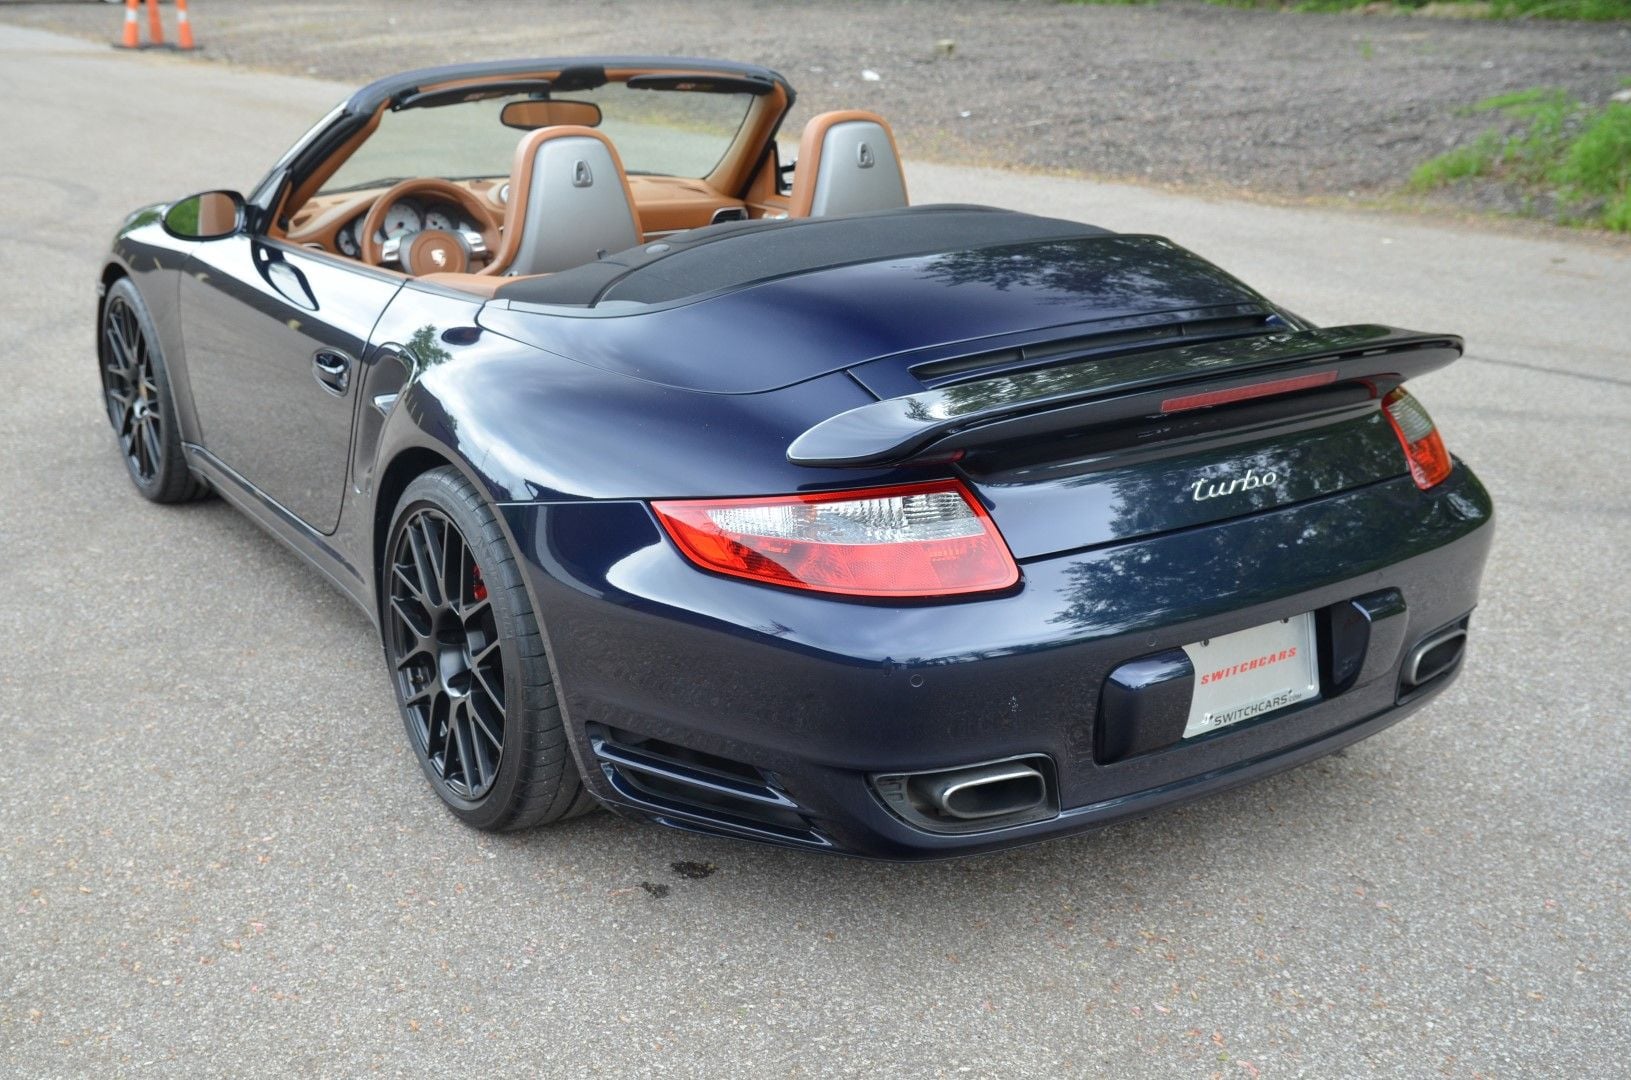 2008 Porsche 911 - 2008 Porsche Turbo Cab Cobalt Blue Tiptronic - Used - VIN WP0CD29968S789219 - 33,500 Miles - 6 cyl - AWD - Automatic - Convertible - Blue - Twinsburg, OH 44087, United States